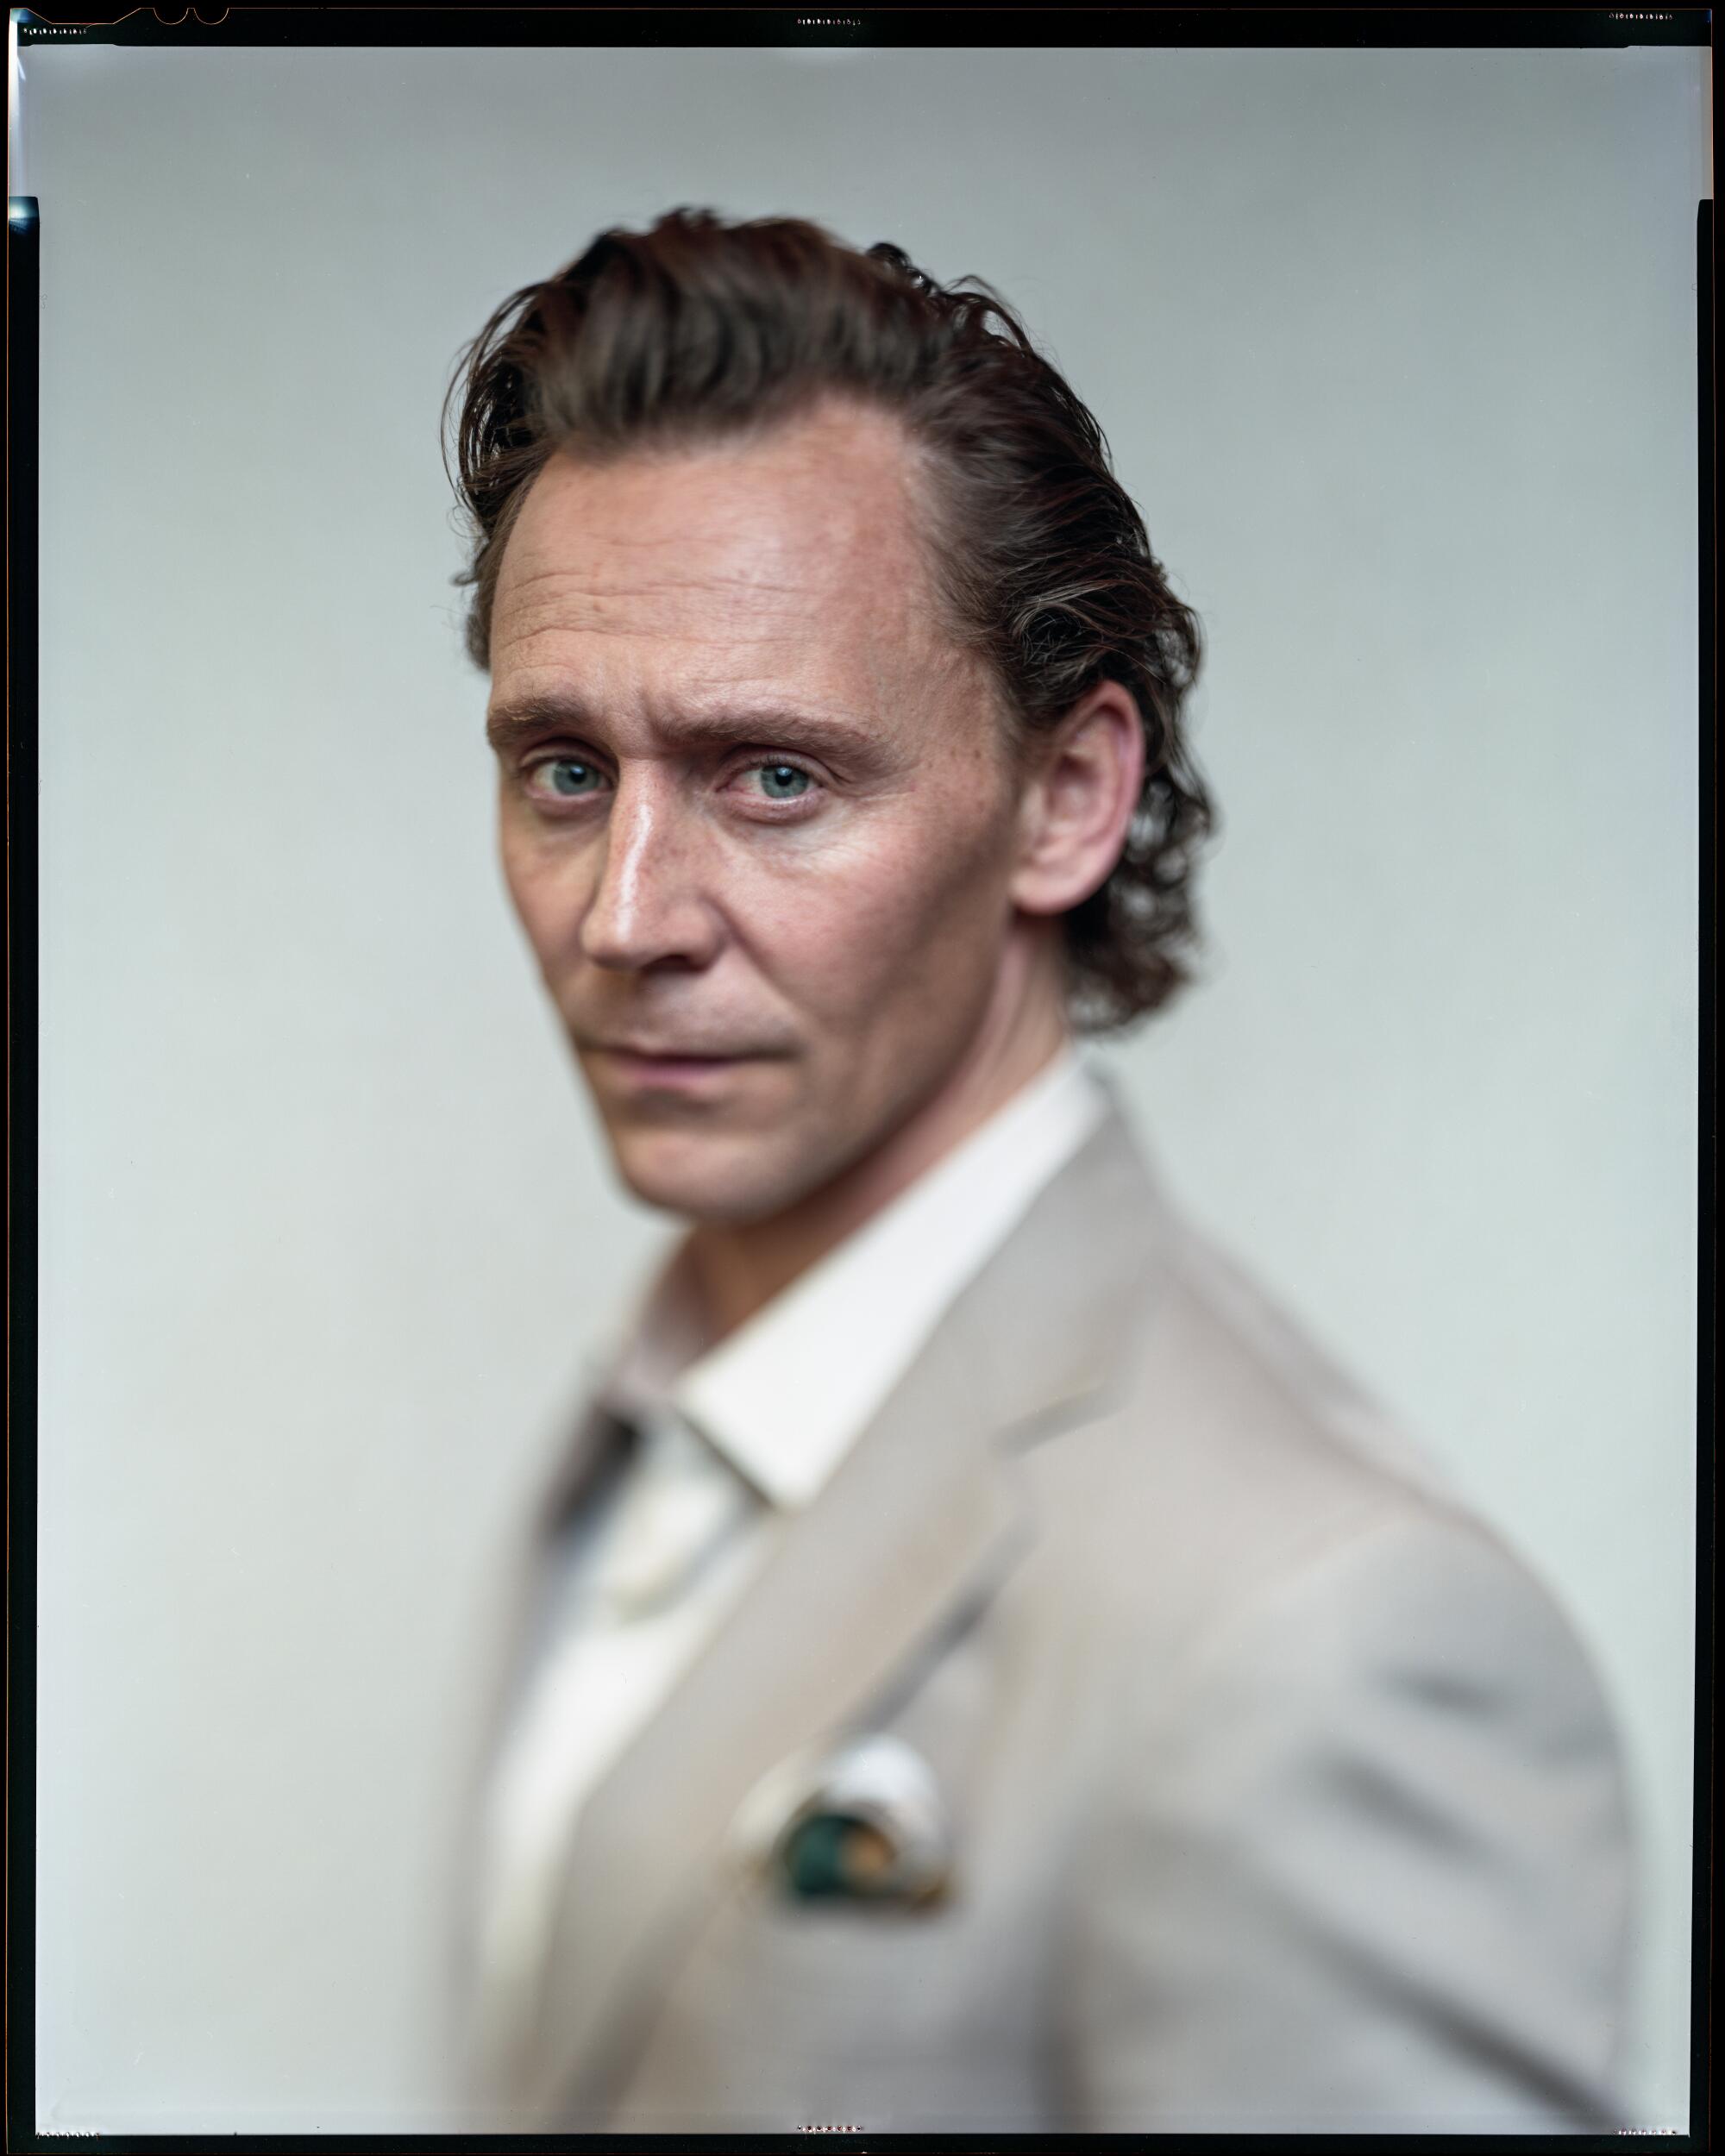 Just a beautiful man, in beautiful clothes — Tom Hiddleston